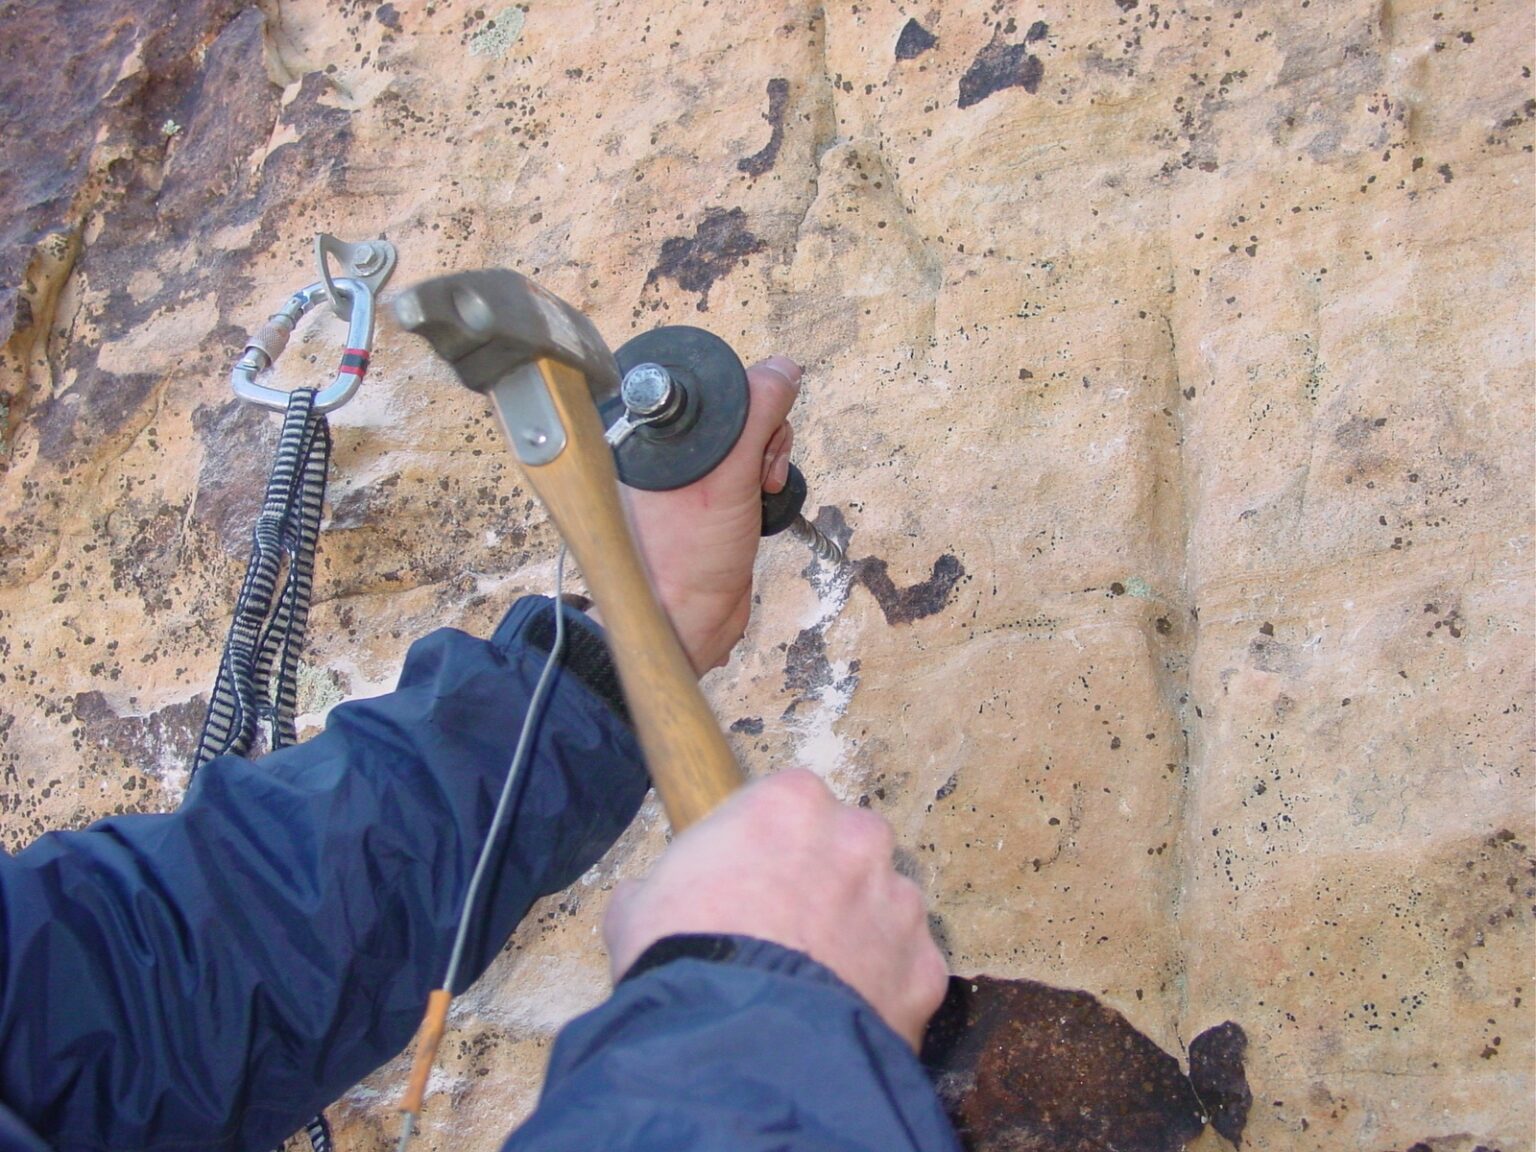 A climber uses a hand drill to place a bolt in the federally designated wilderness of Red Rock Canyon National Conservation Area near Las Vegas.